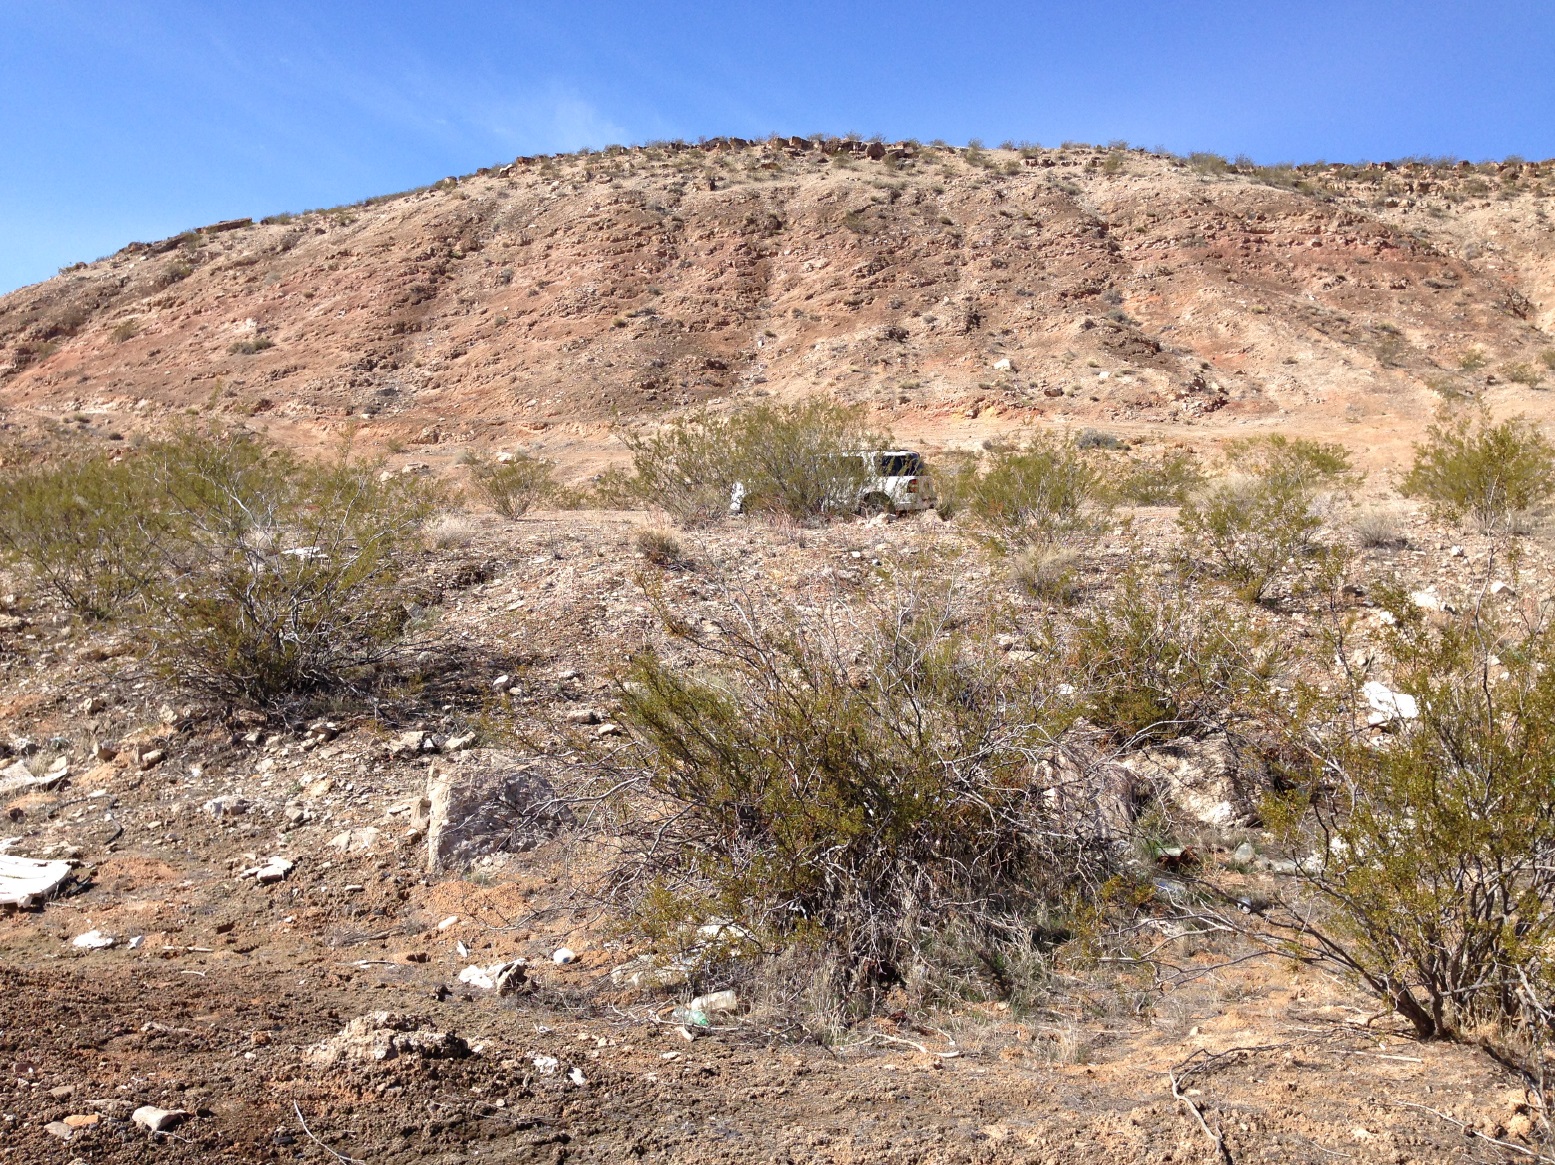 Site of the Escalante oil well explosion